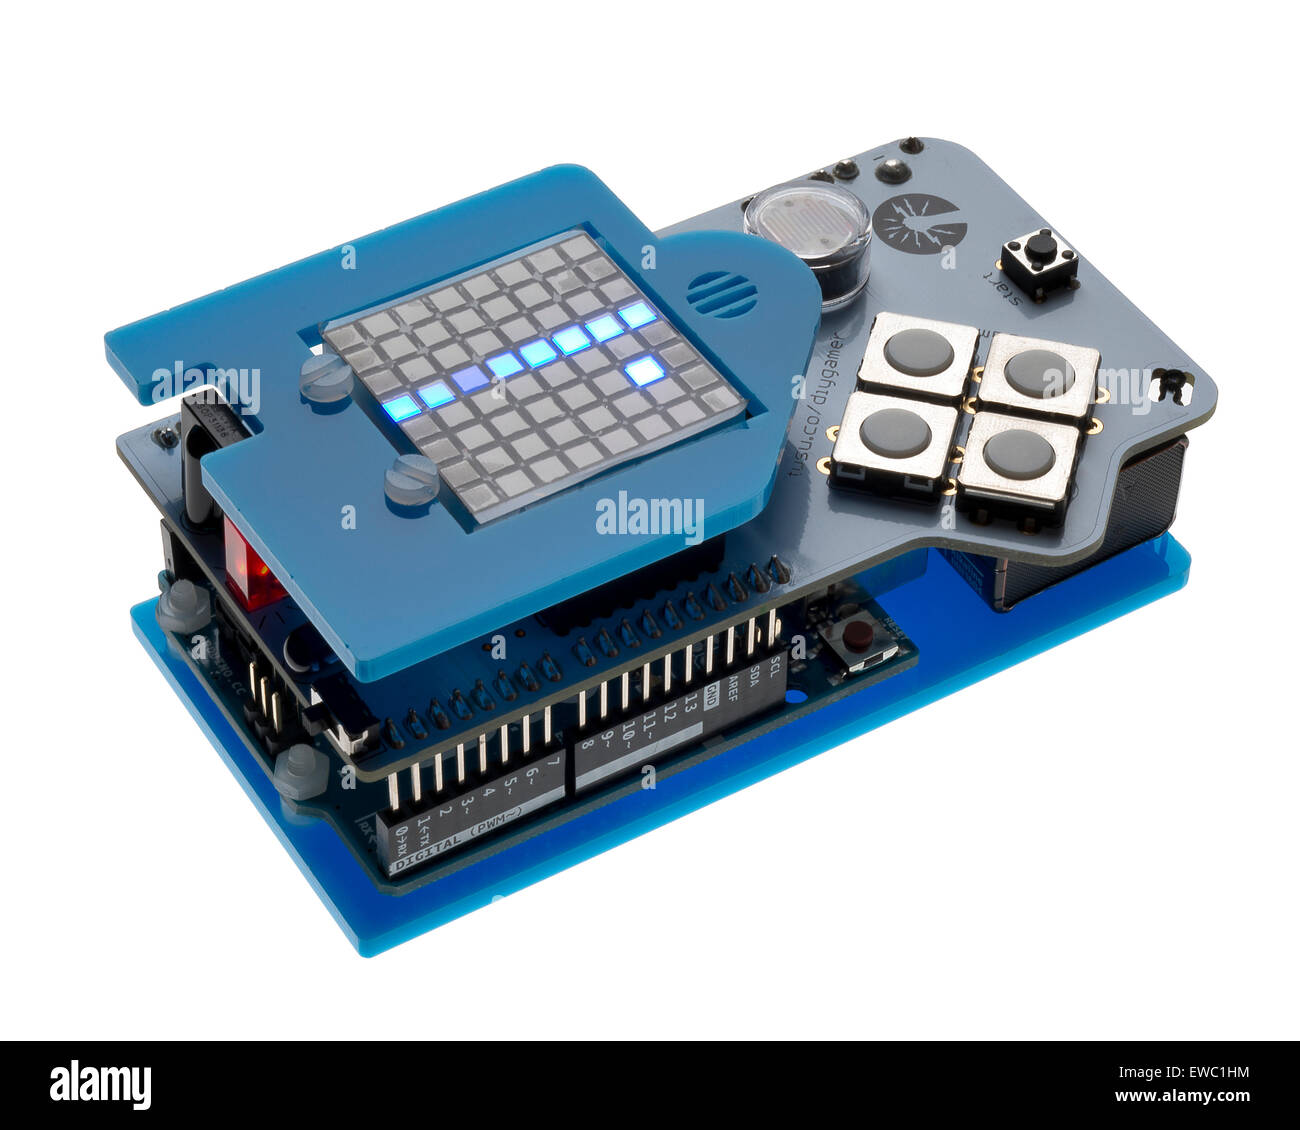 DIY gamer kit. Gadget for designing games and play. Learn to code your own games. Stock Photo